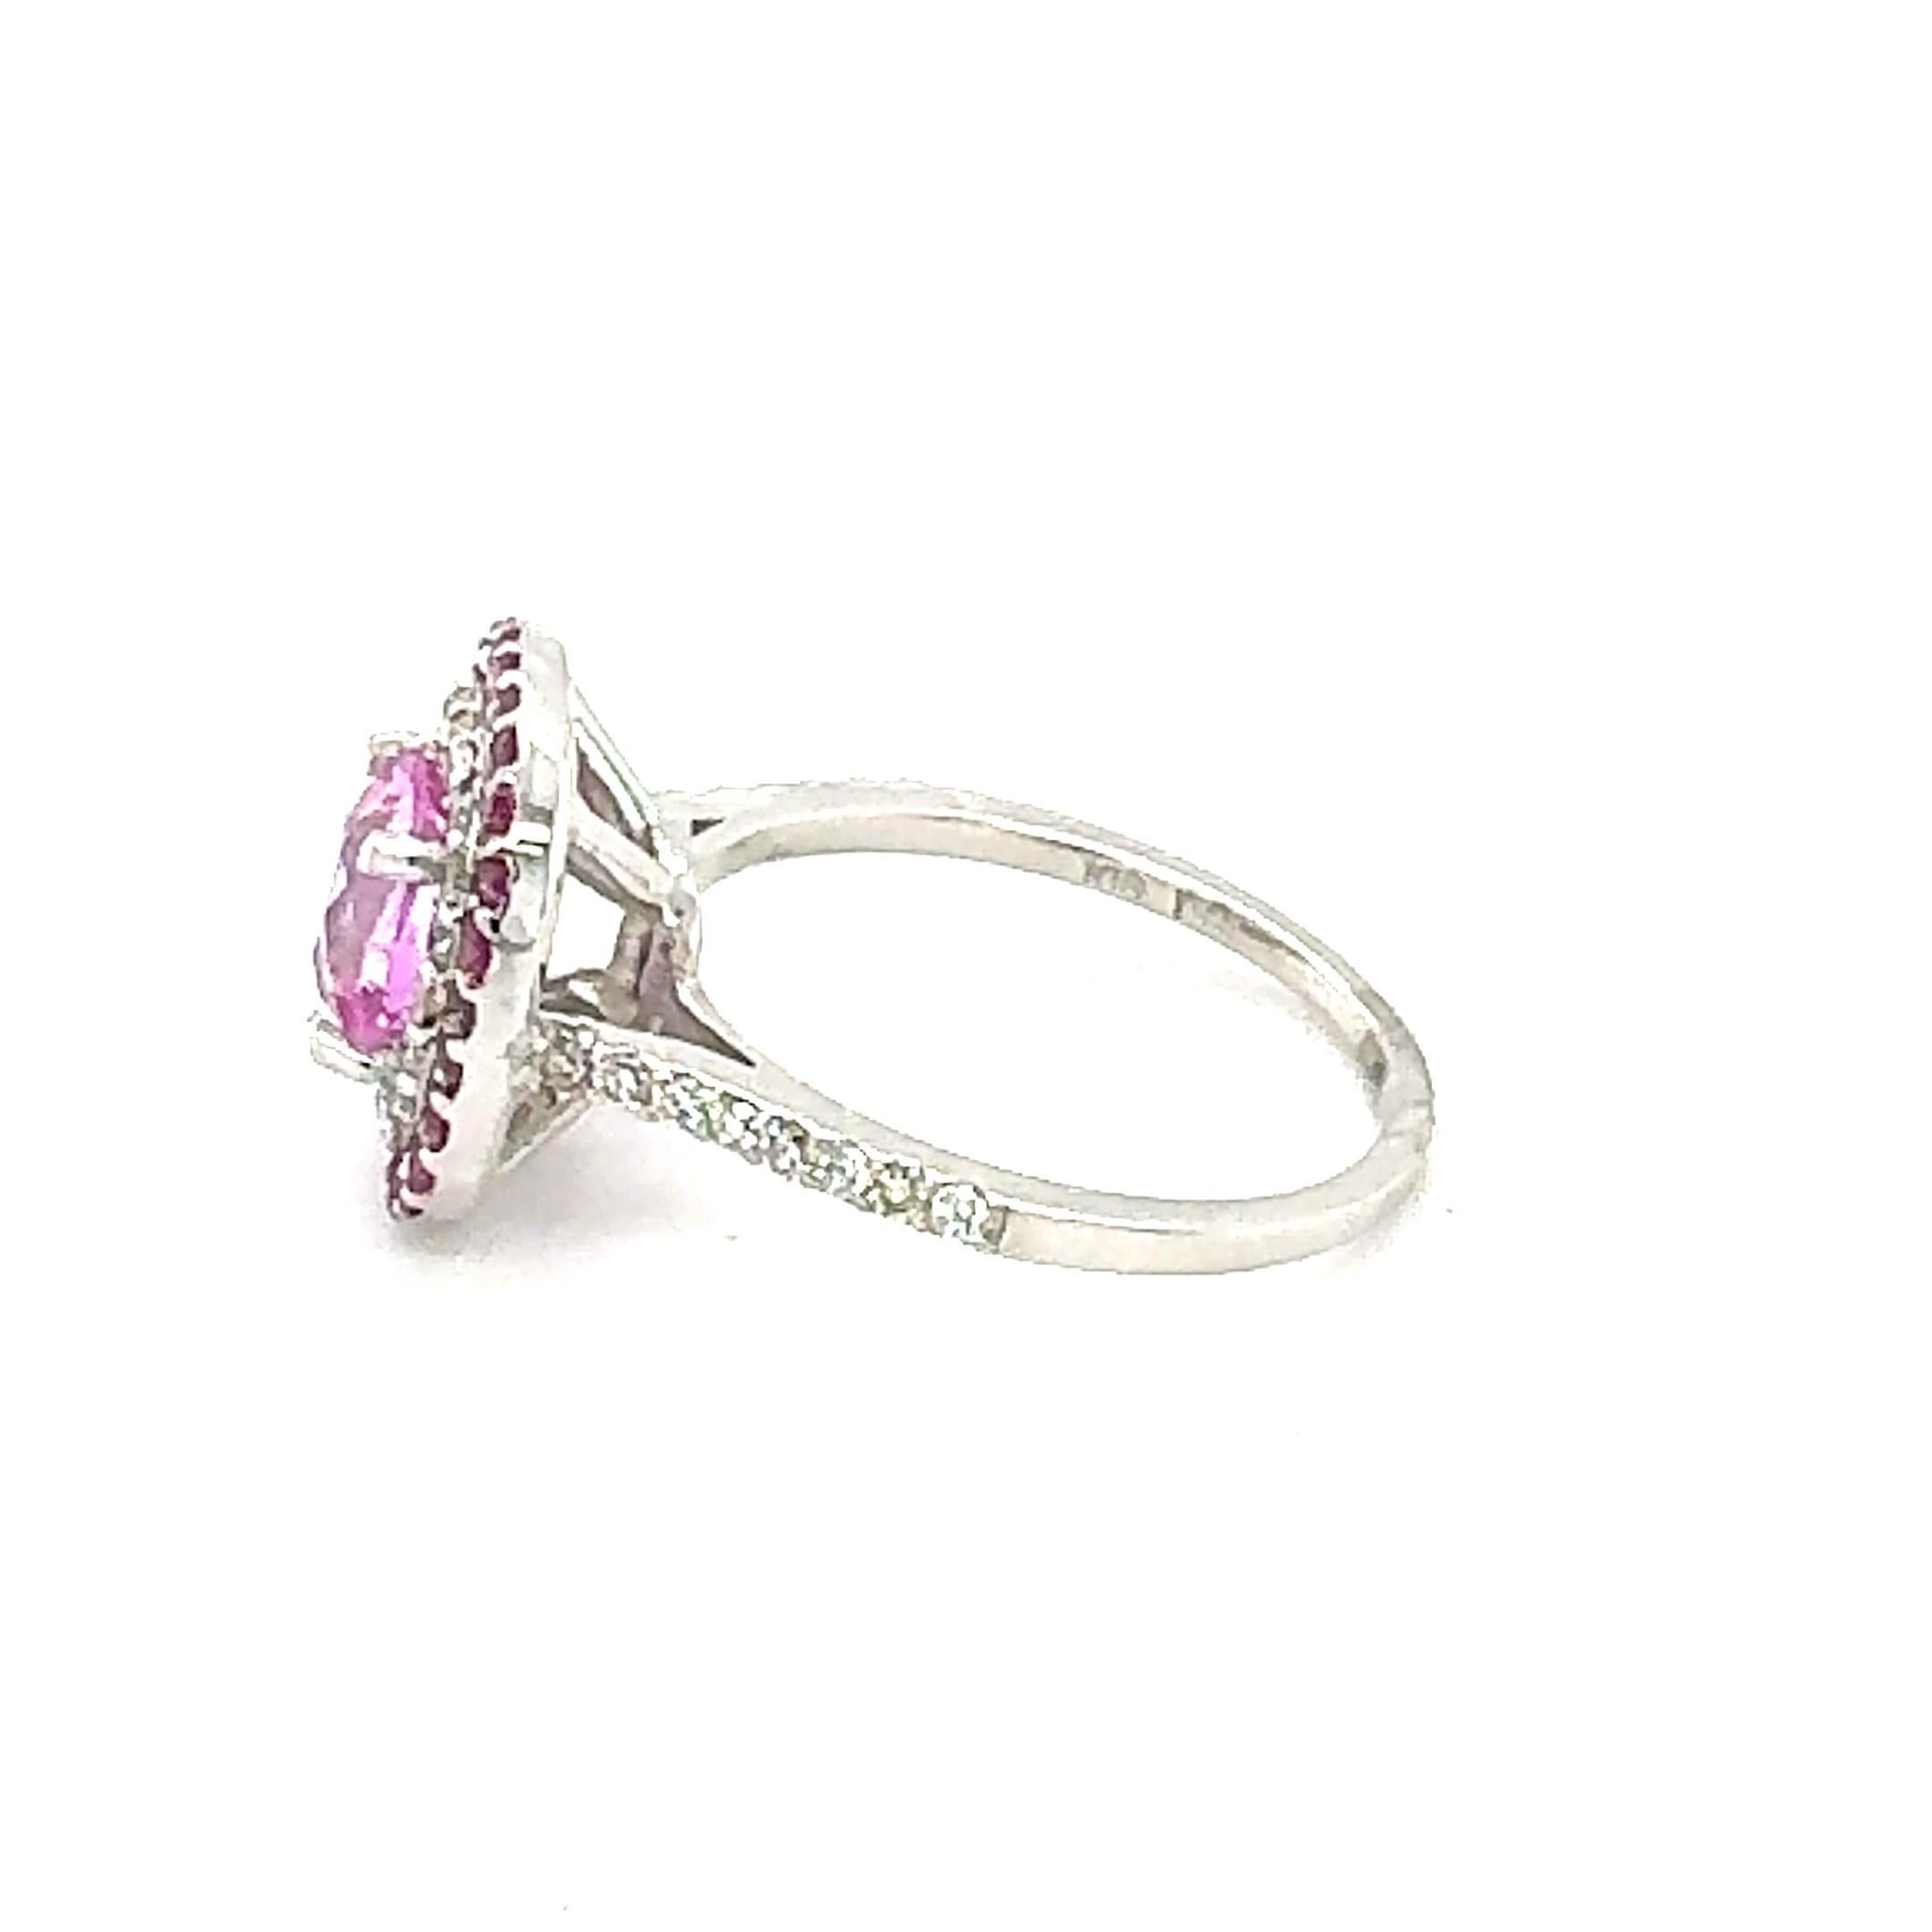 GIA Certified 2.32 Carat Cushion Cut Pink Sapphire Diamond White Gold Ring For Sale 2